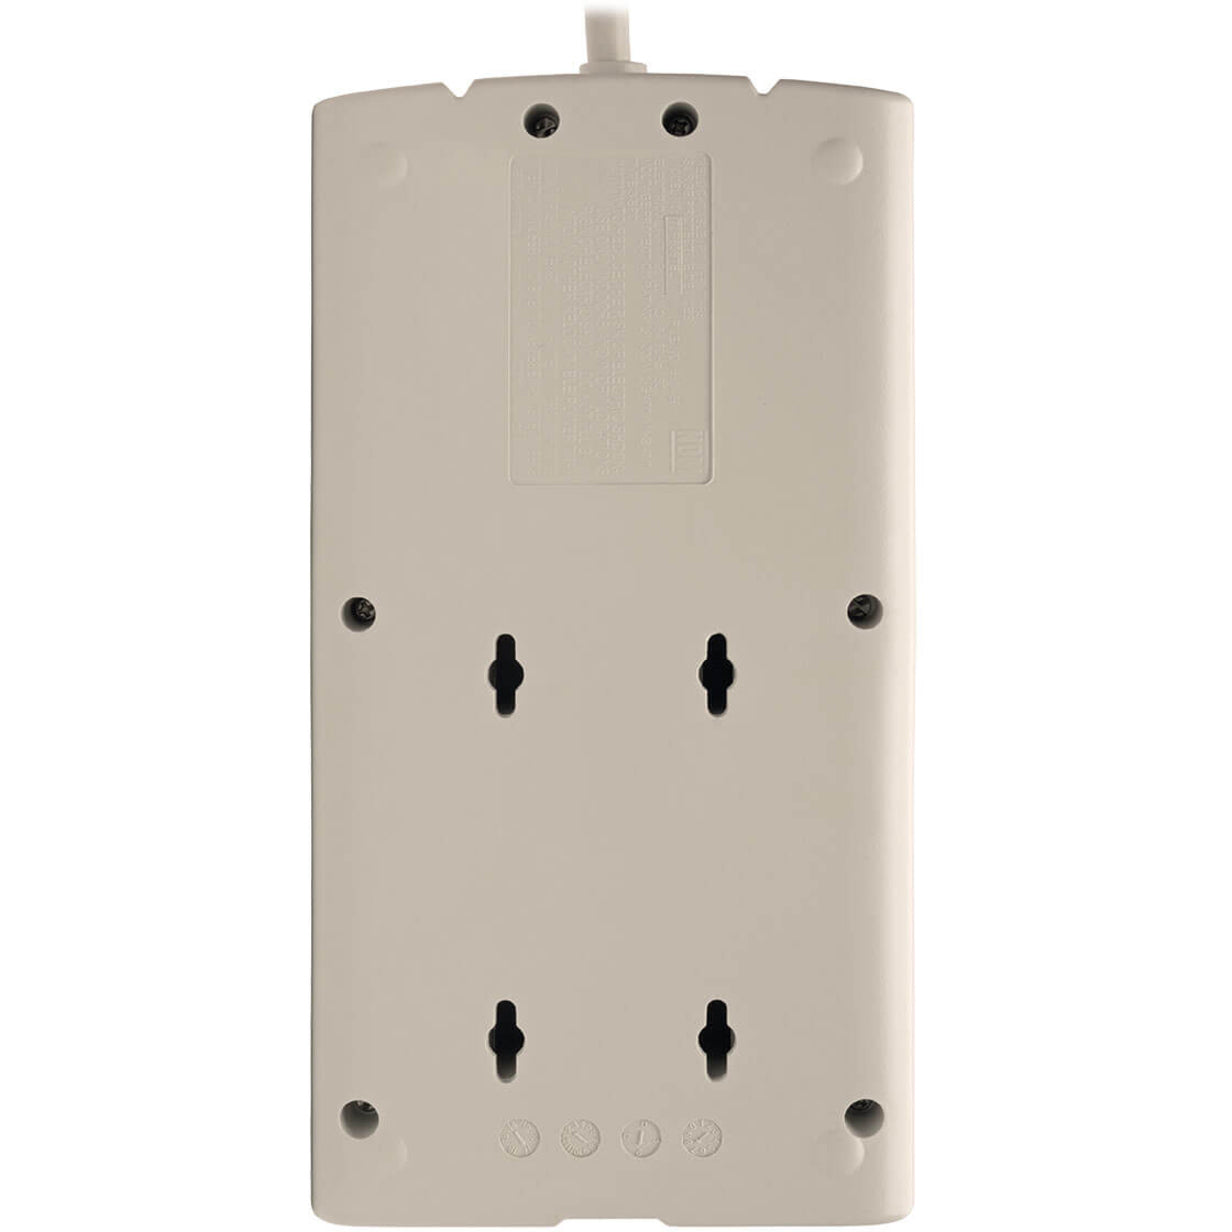 Tripp Lite TLP808TEL Protect It 8-Outlet Surge Suppressor, 2820 Joules, 8' Cord